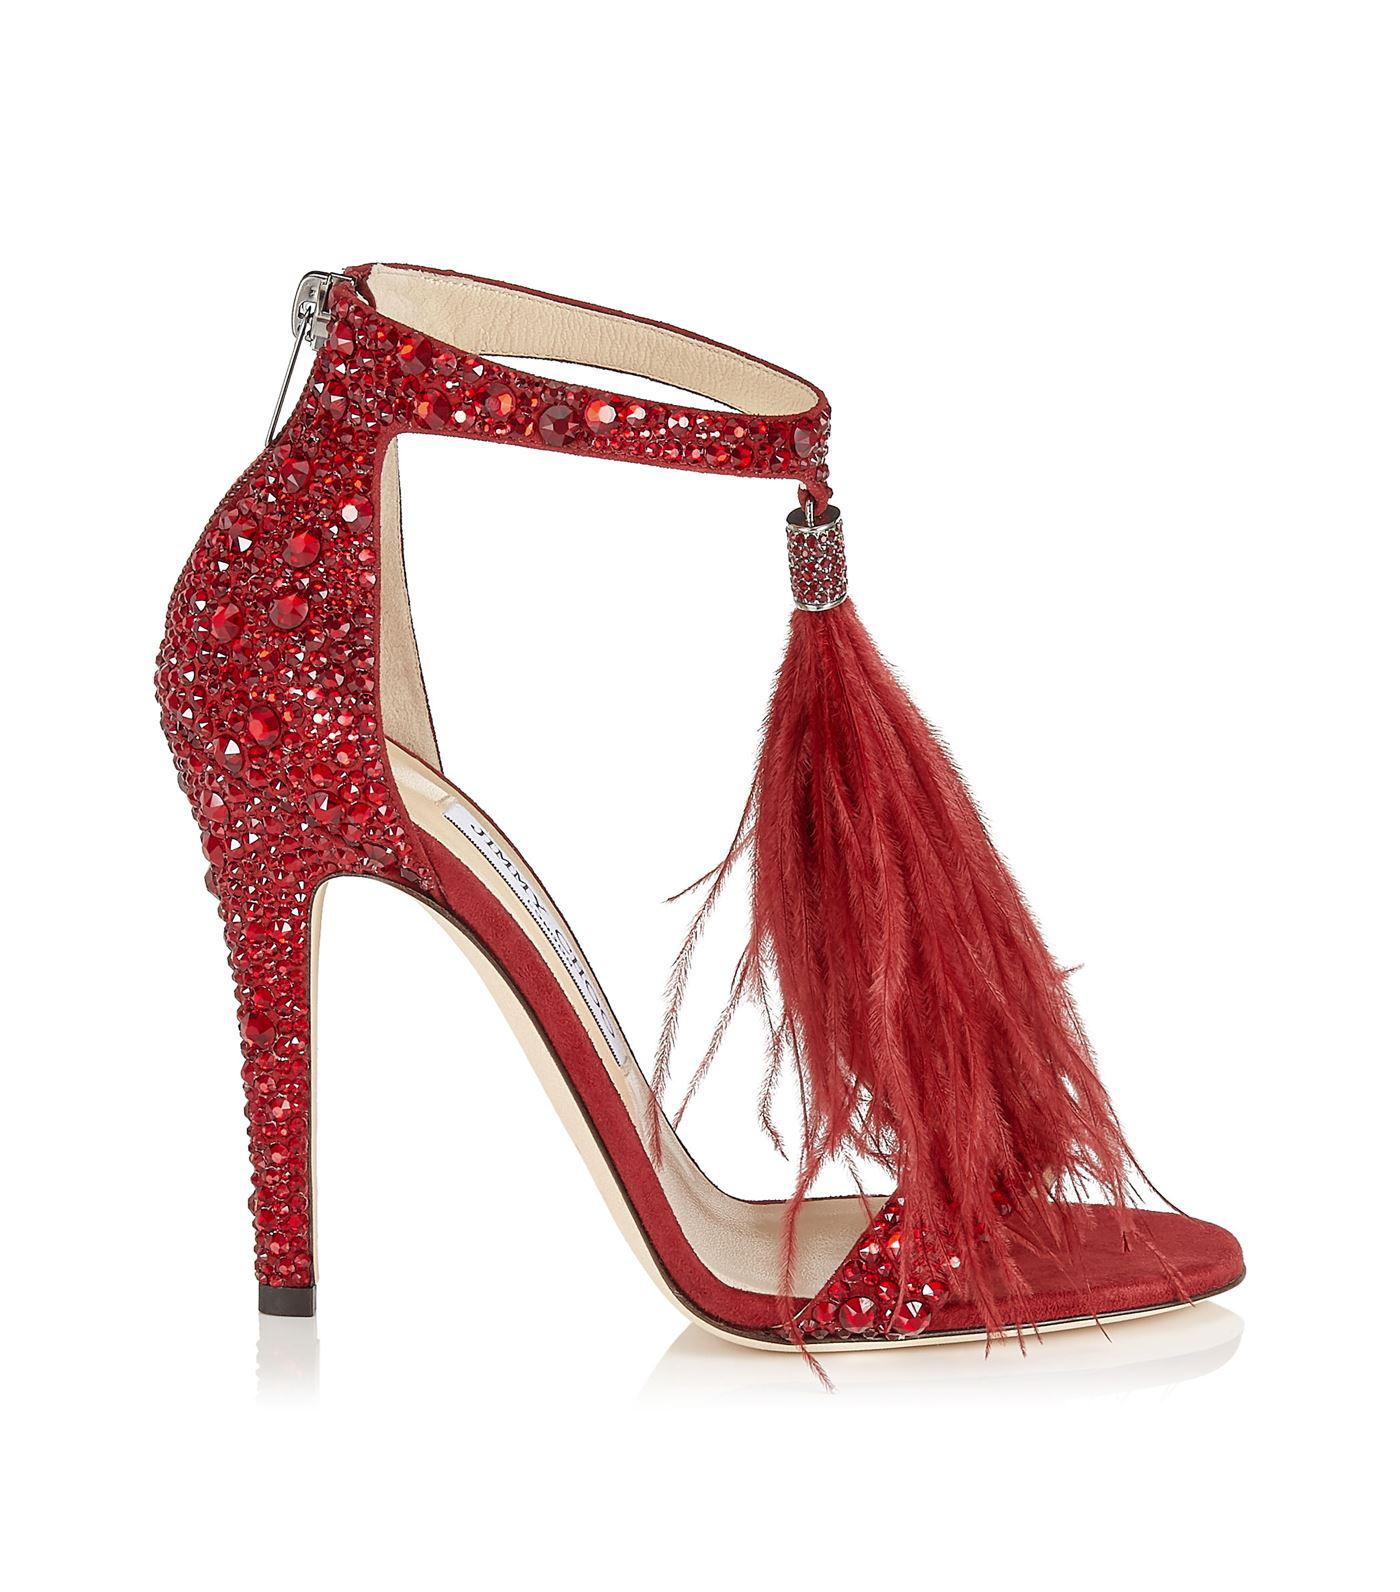 Jimmy Choo Leather Viola 100 Sandals in Red - Lyst